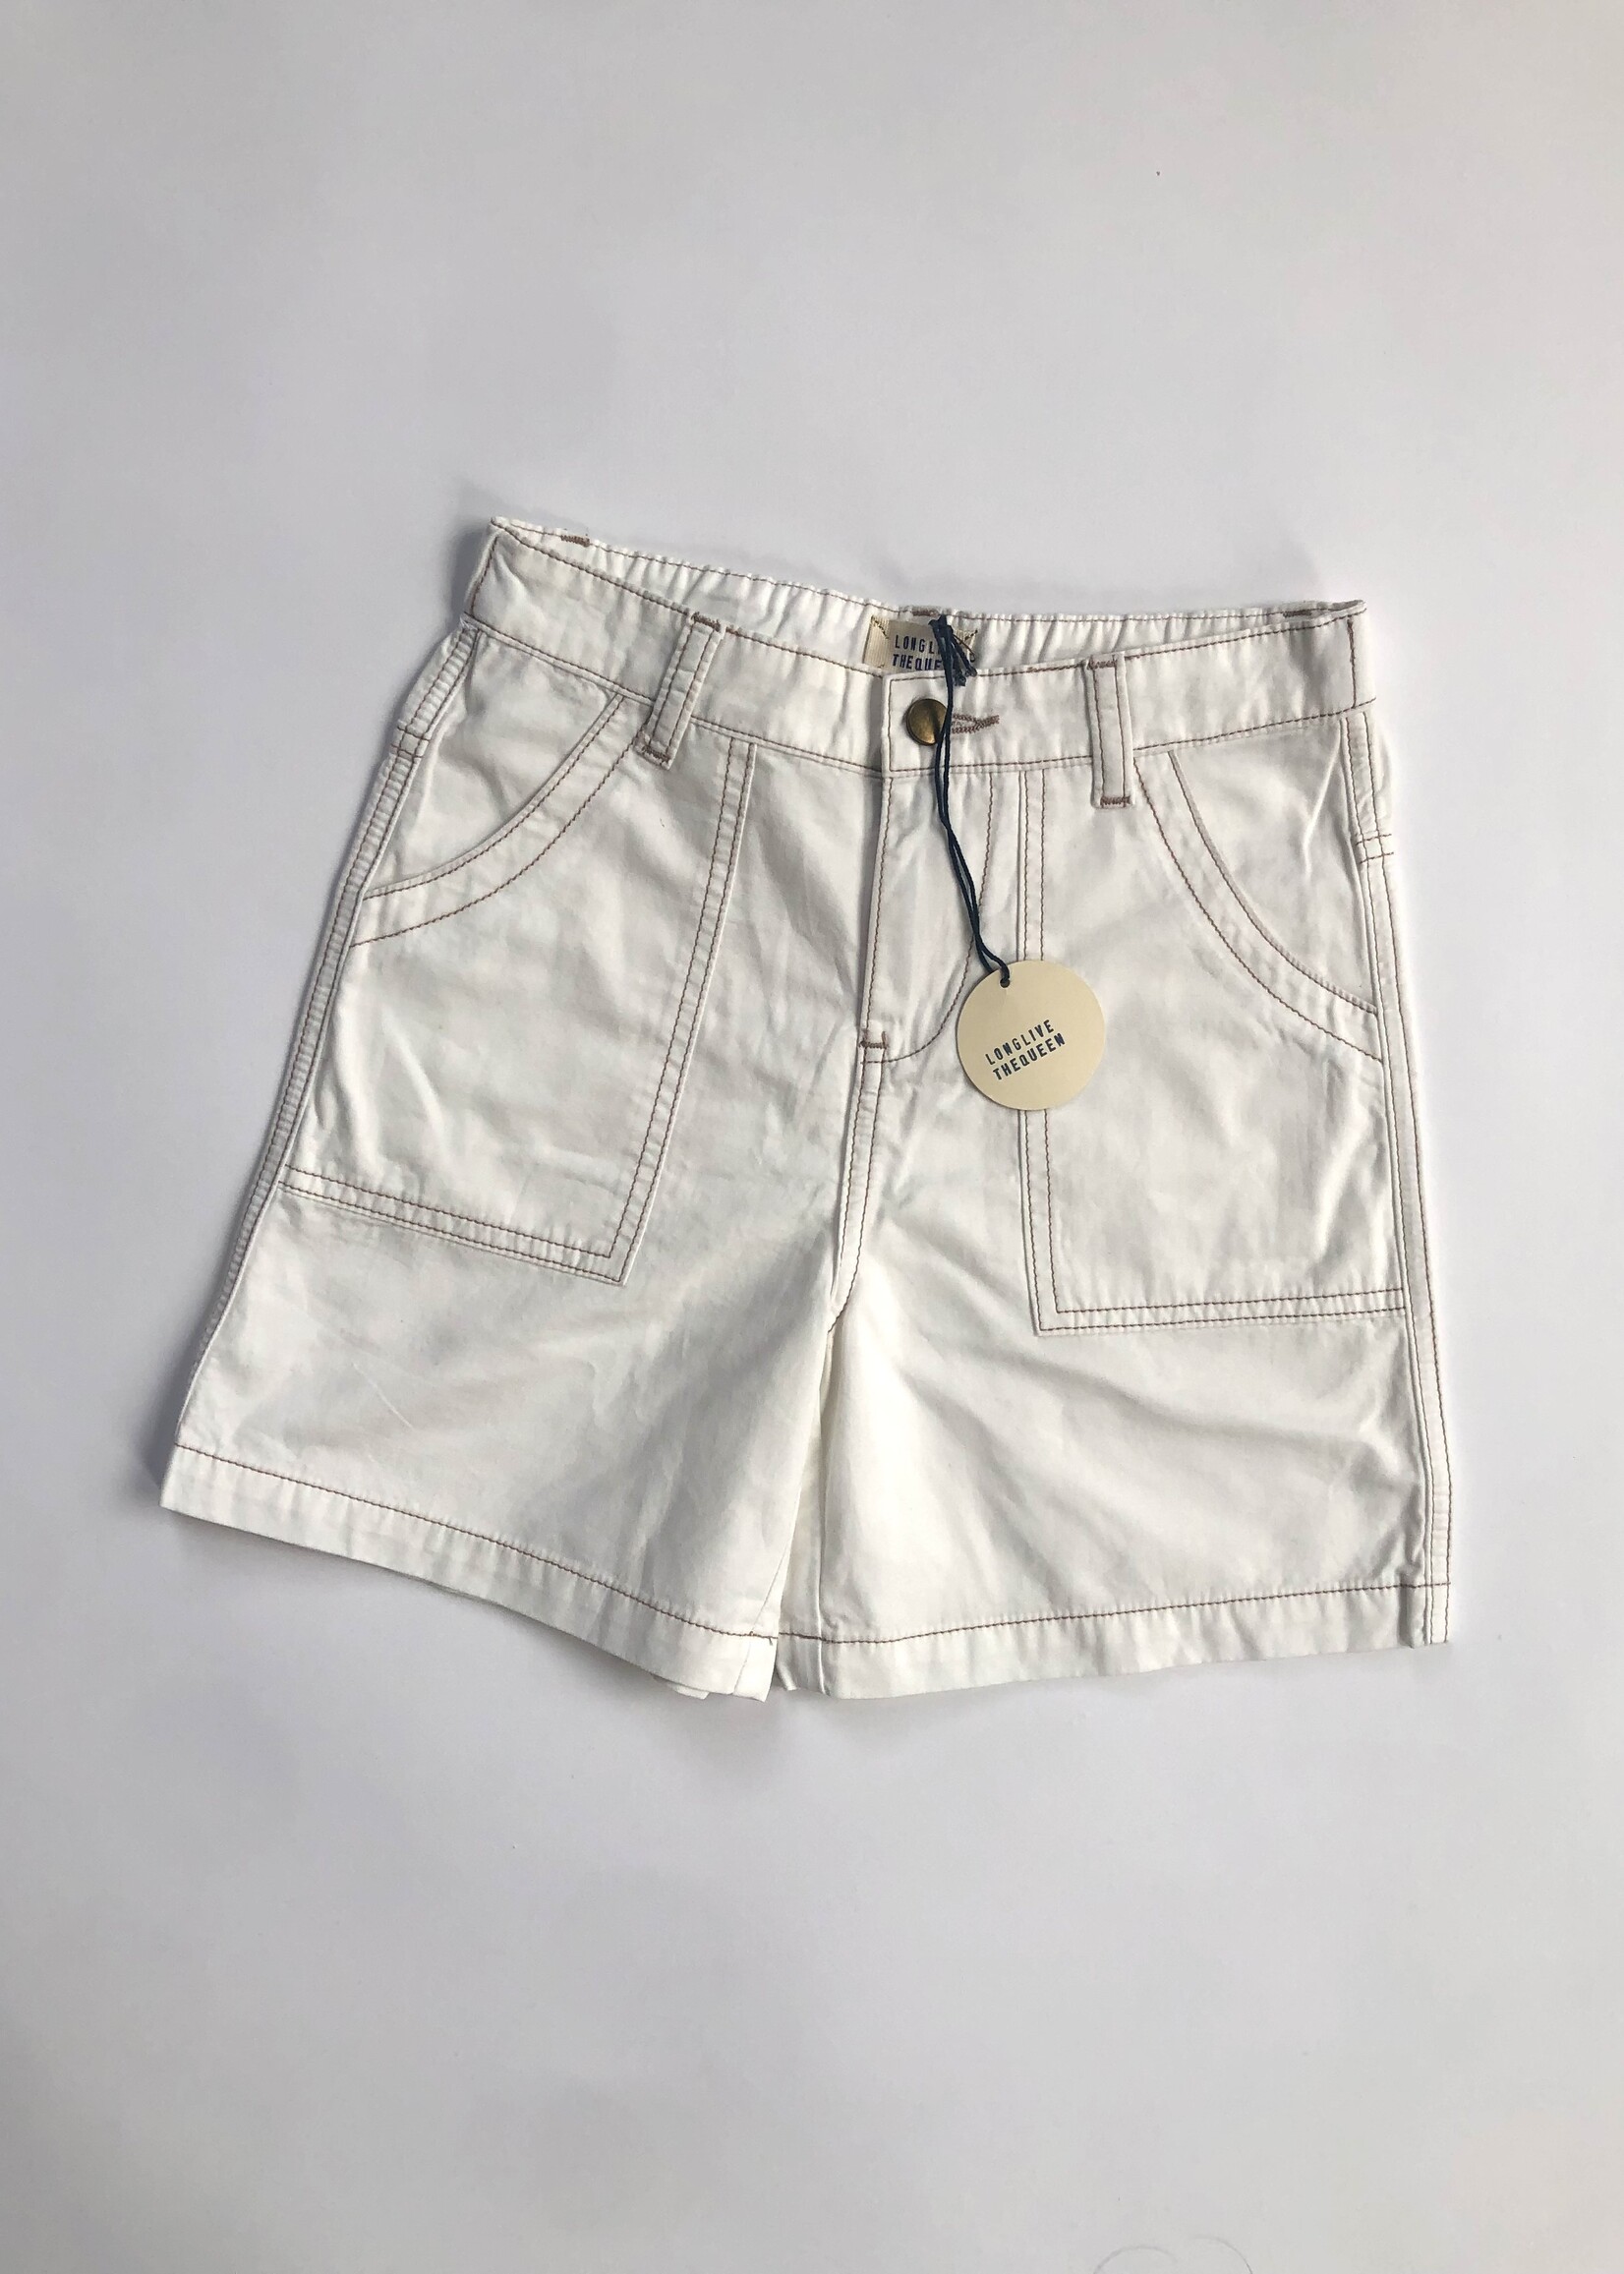 Long Live The Queen White bermuda short 8y